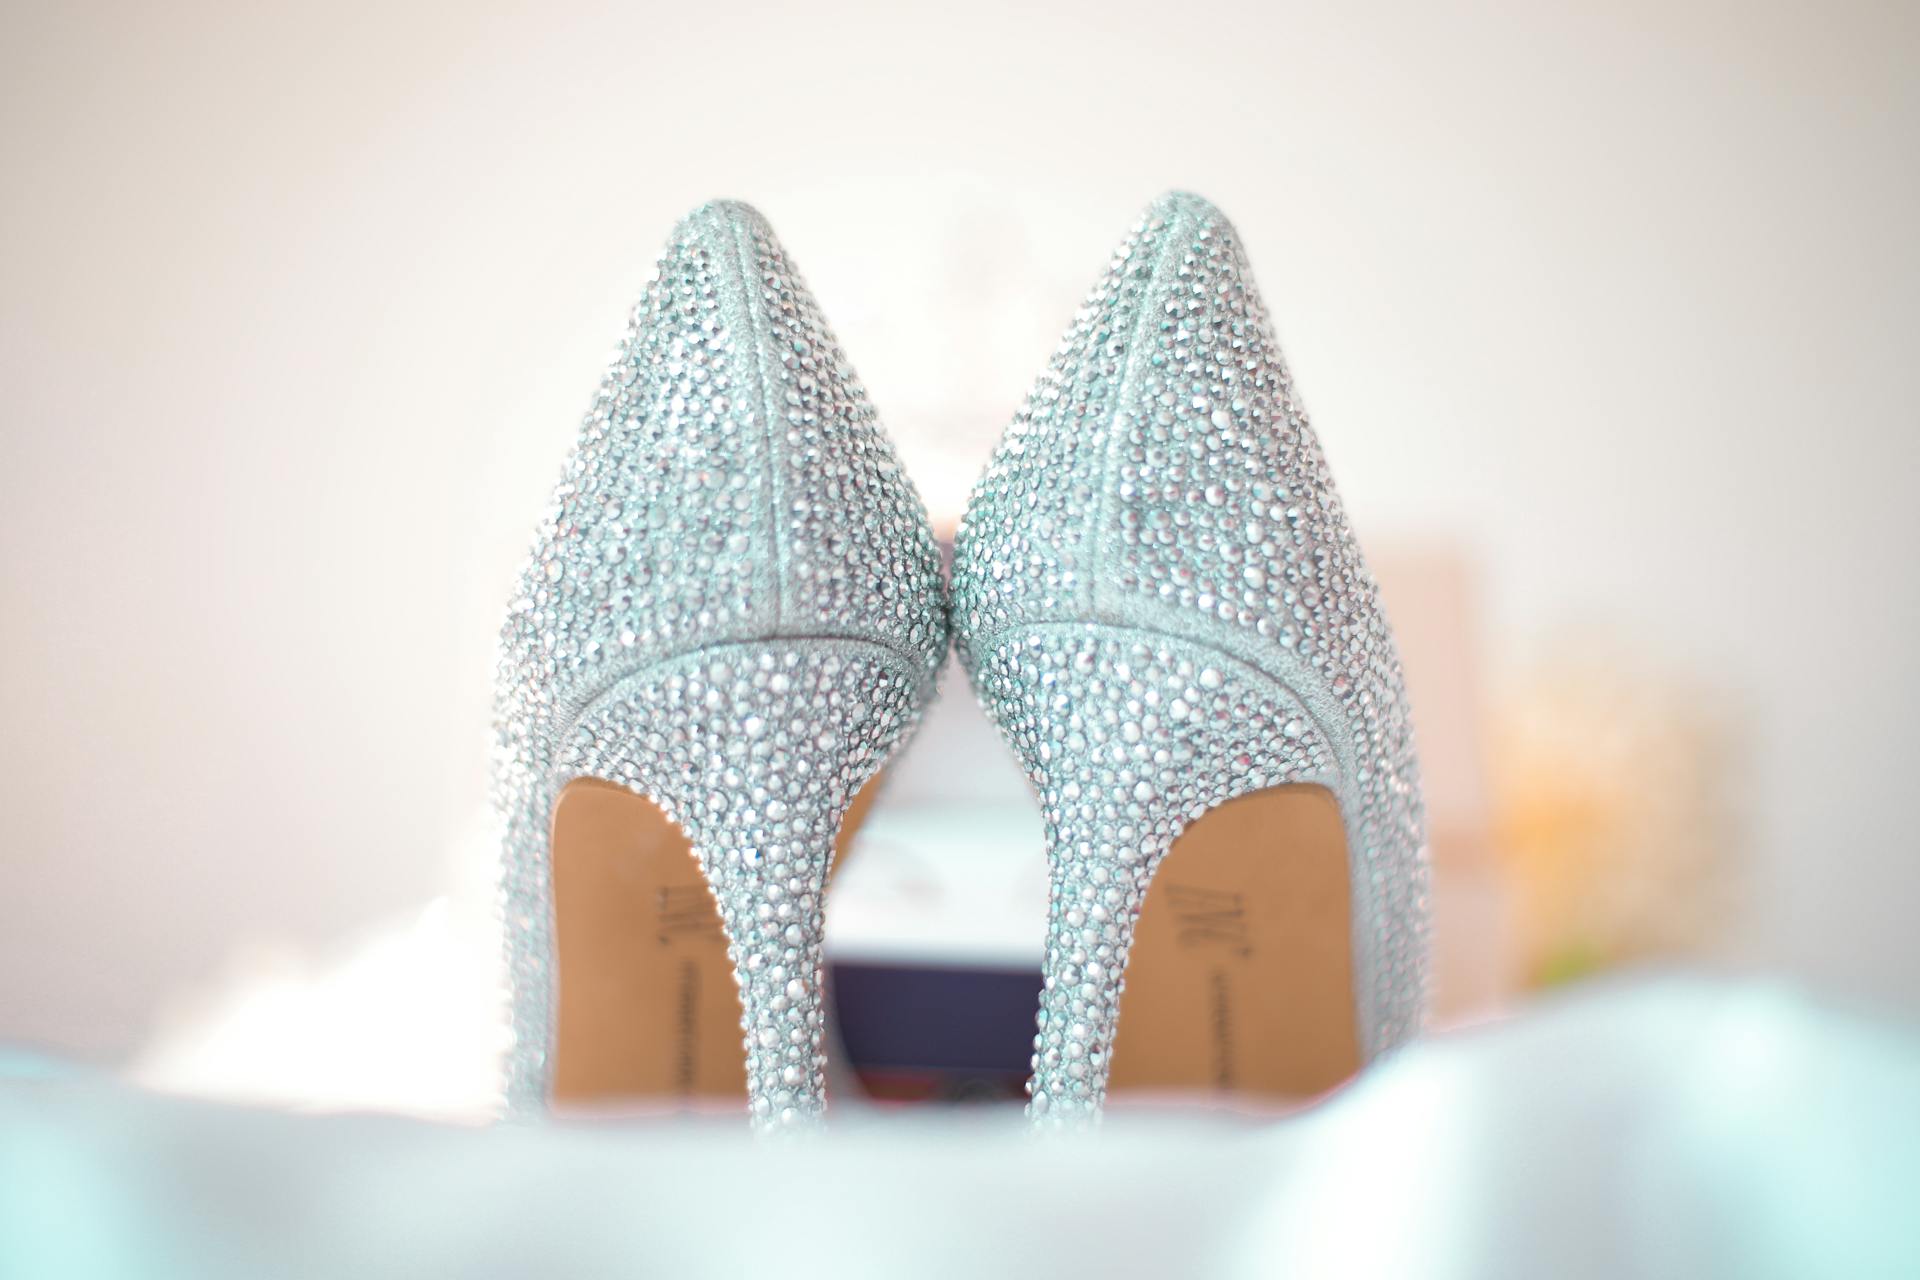 Stylish wedding high heels decorated with shiny silver rhinestones placed on white fabric